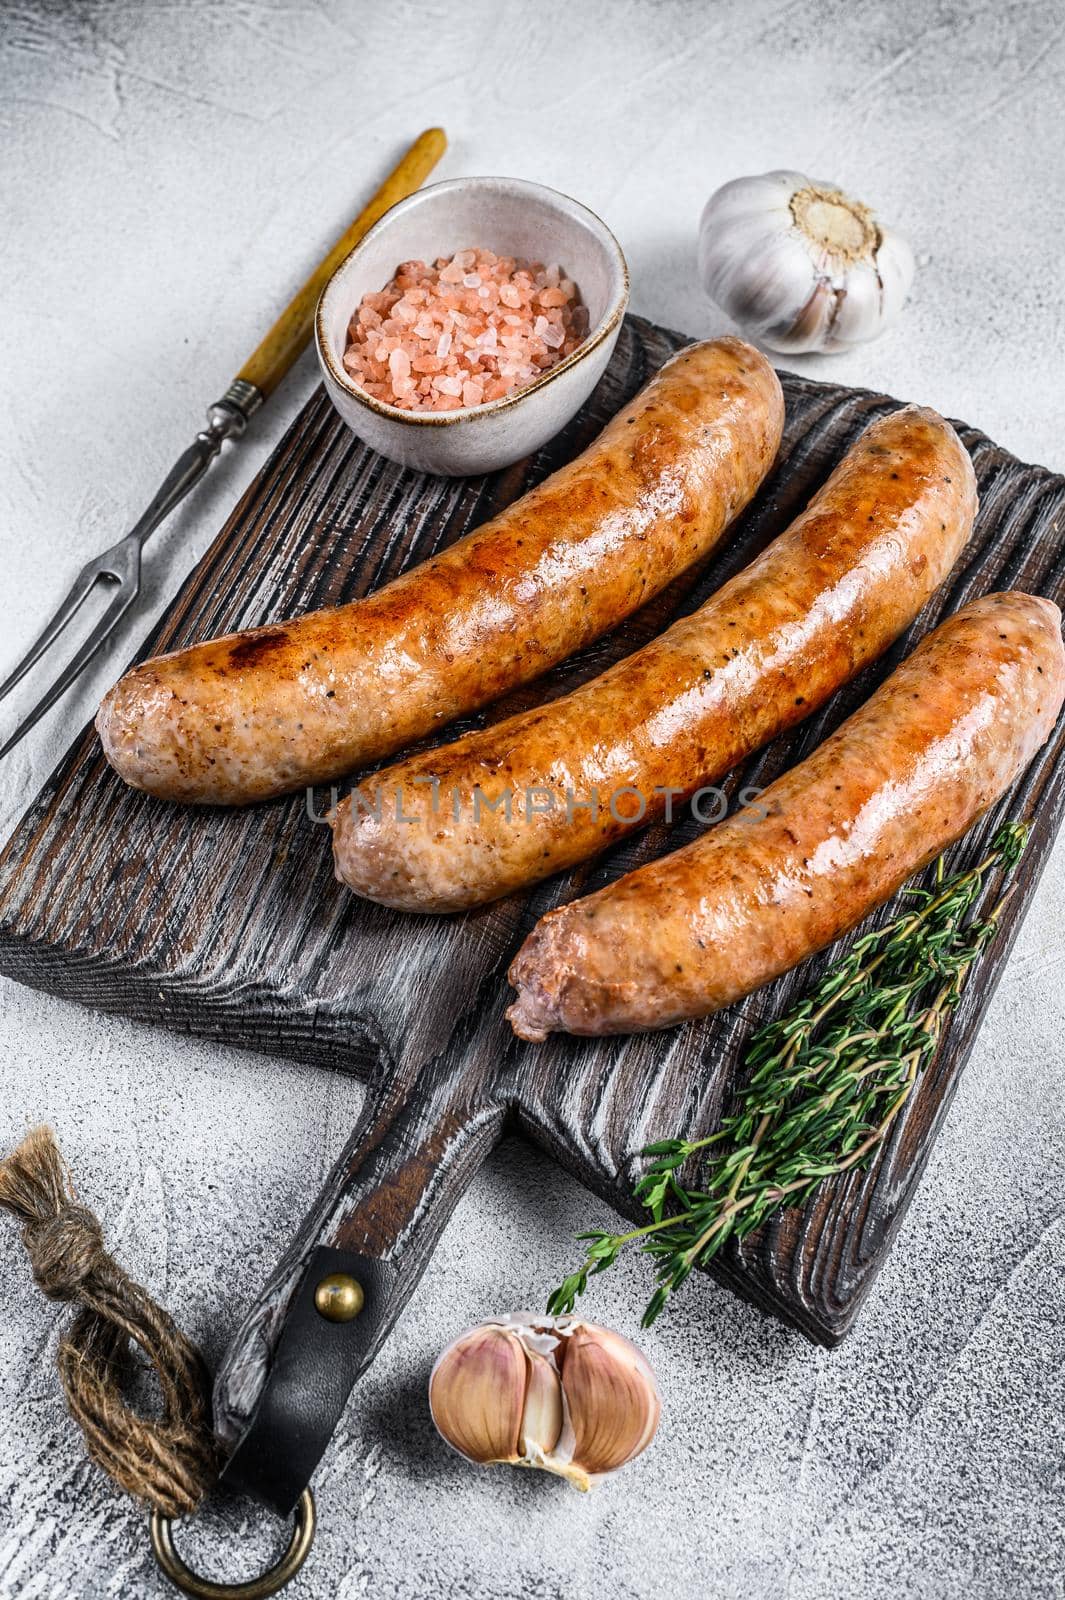 Sausages barbecue fried with spices and herbs on a wooden cutting board. Top view. White background by Composter